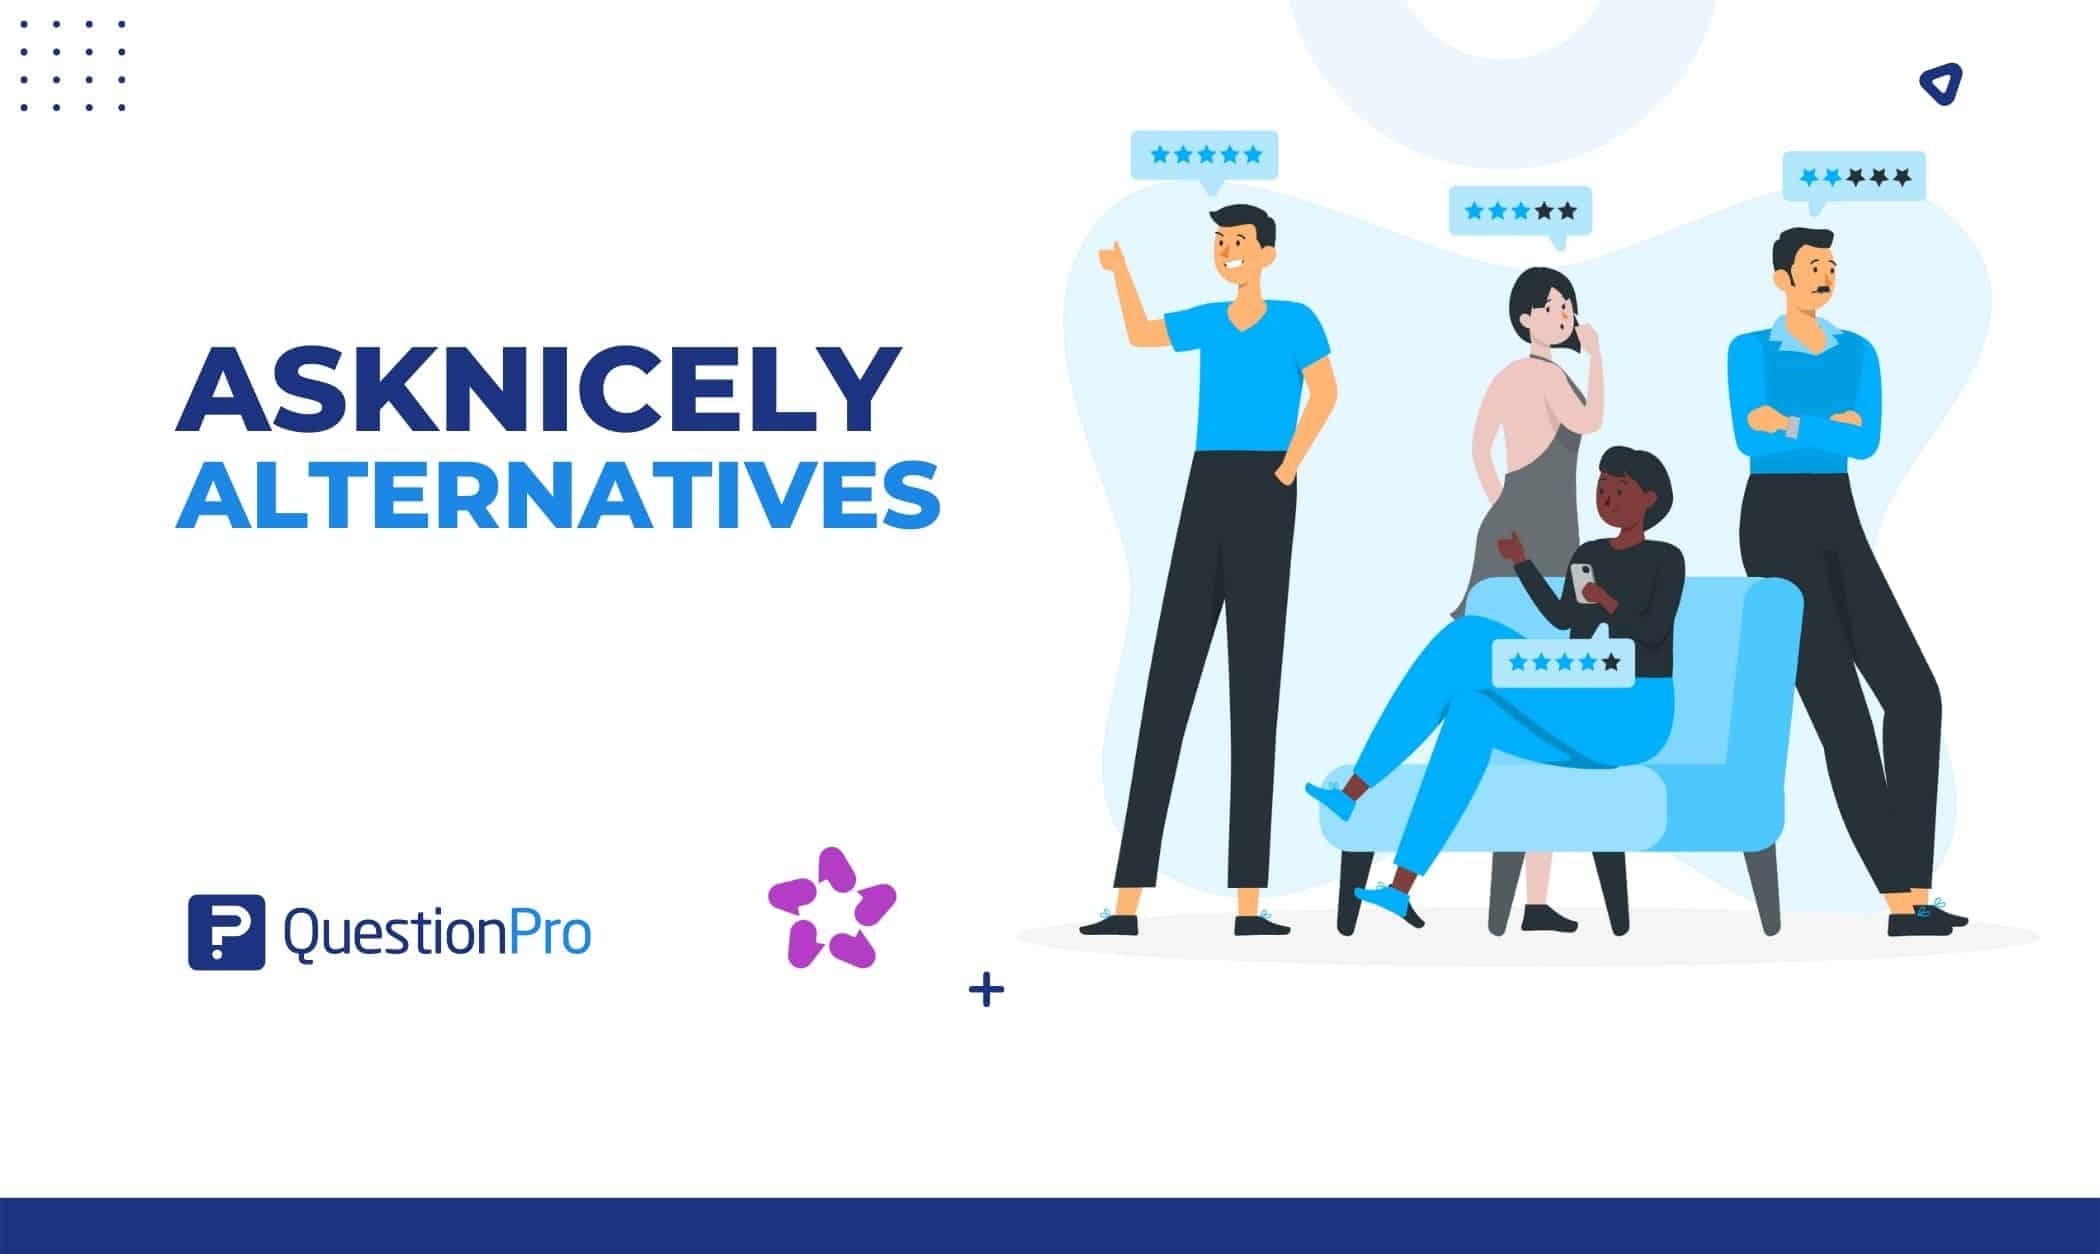 8 Best AskNicely Alternatives To Check Out in 2022